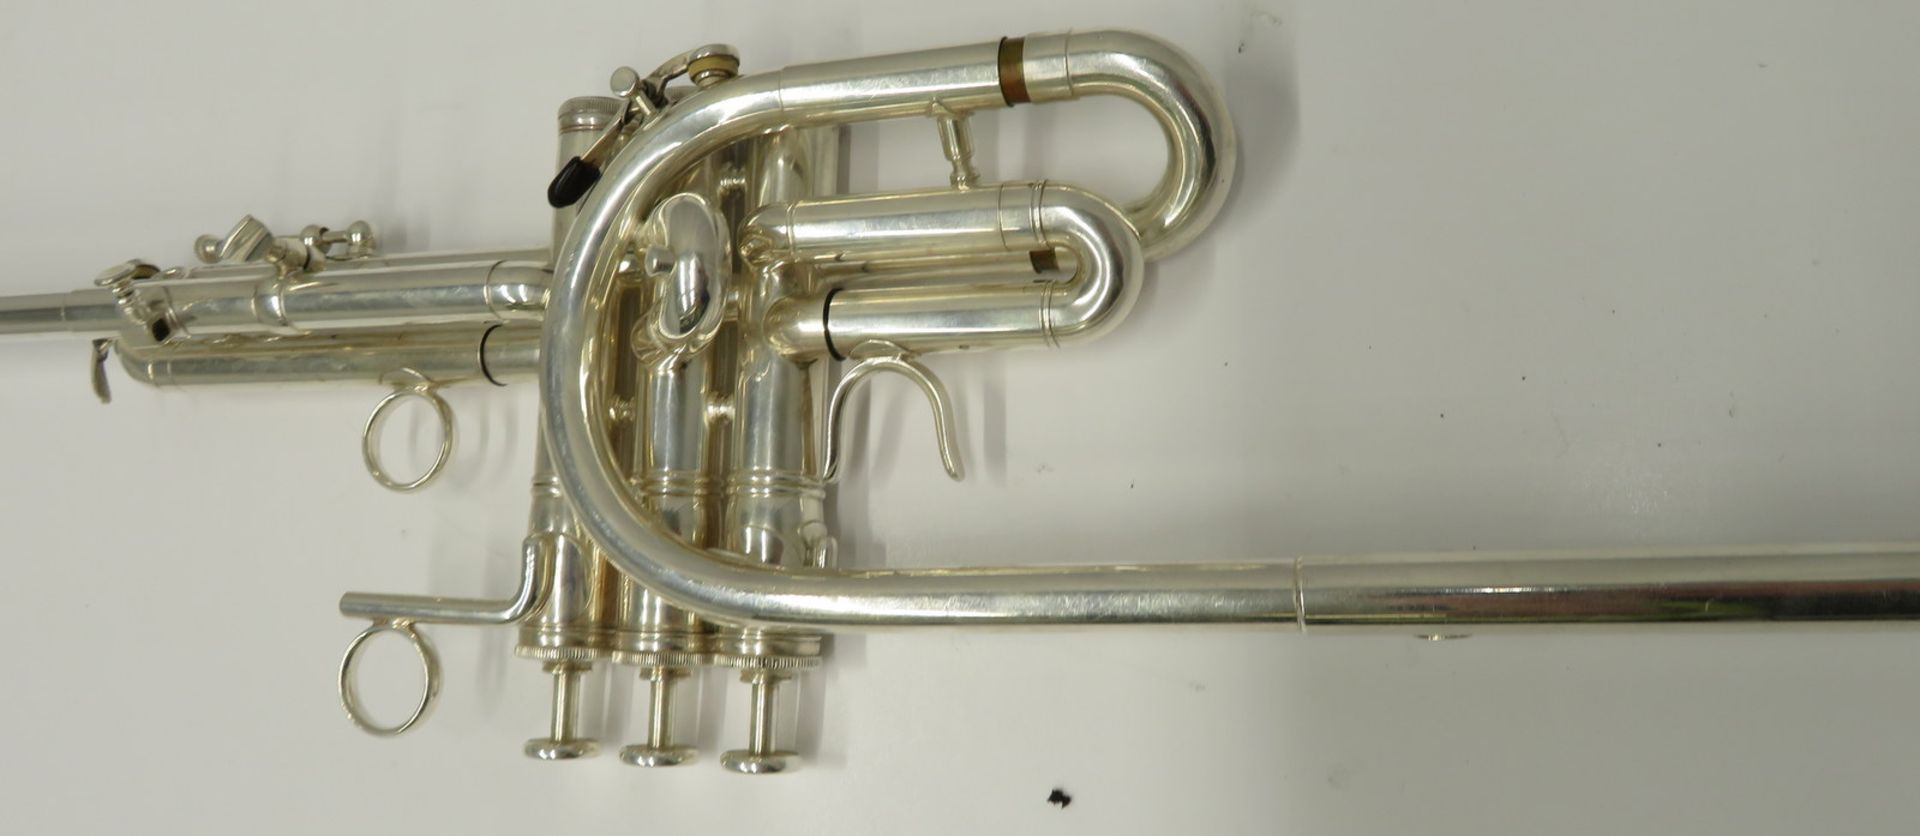 Smith-Watkins fanfare trumpet with case. Serial number: 693. - Image 11 of 16